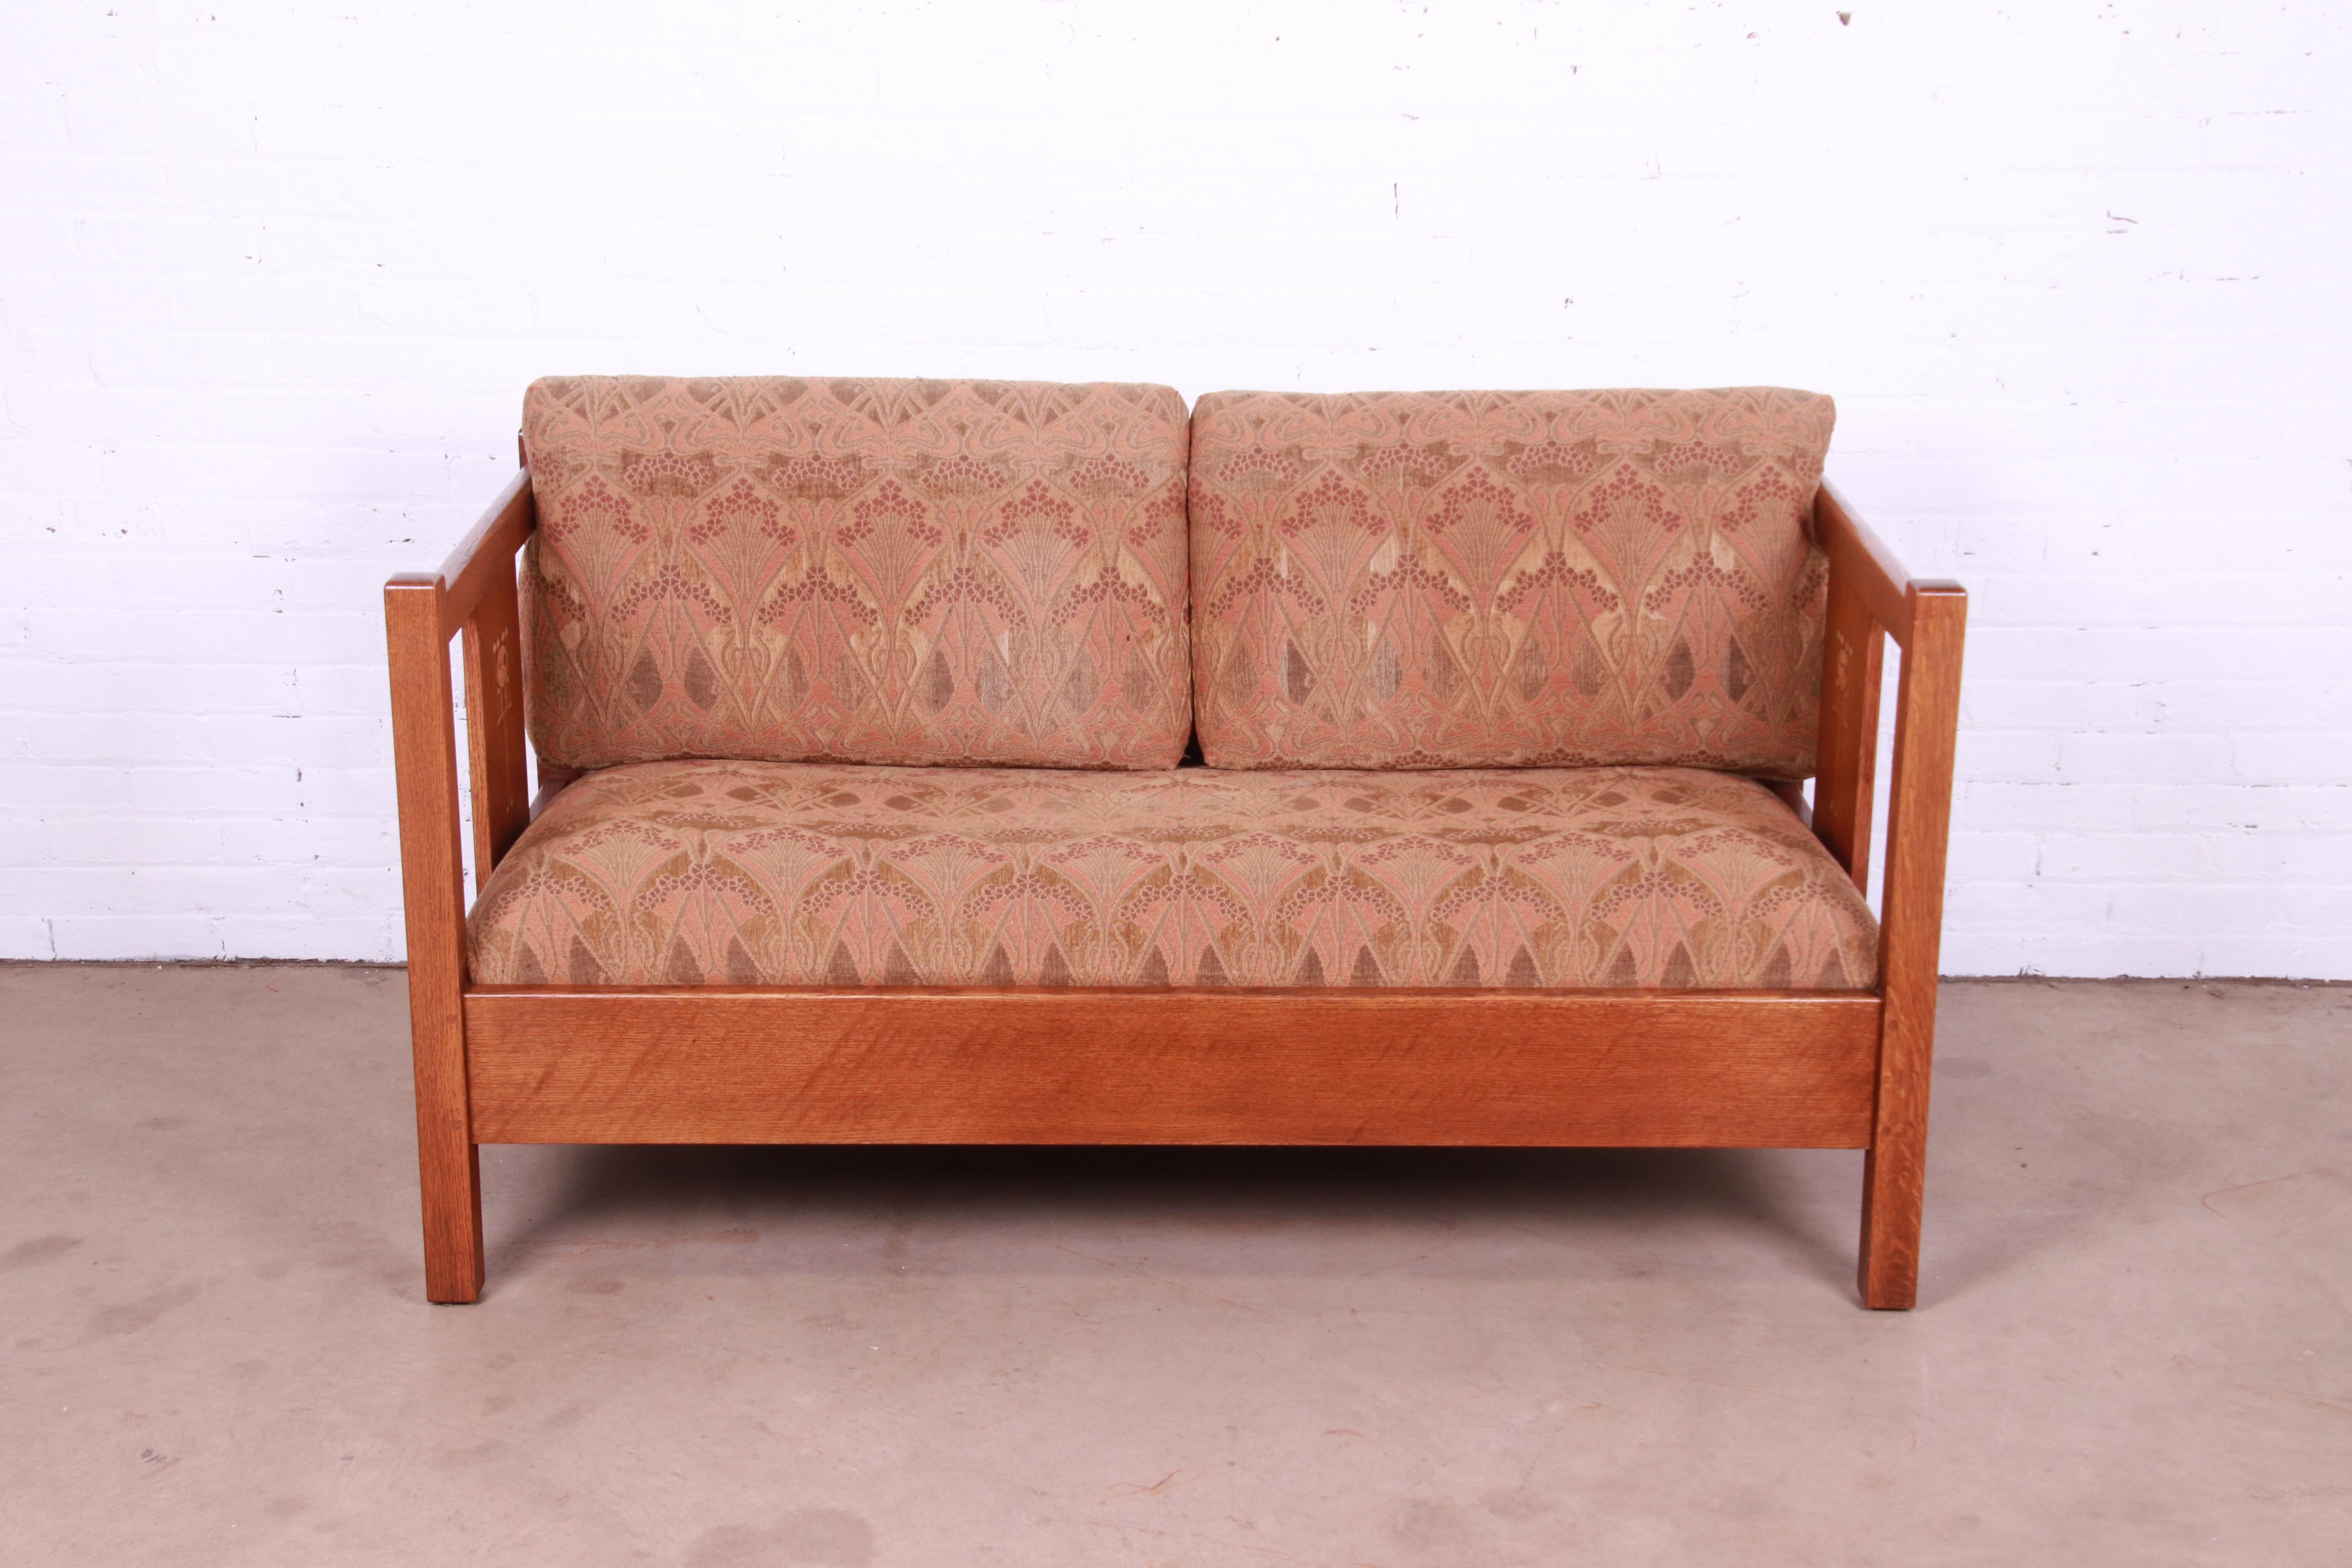 A gorgeous Mission or Arts & Crafts style loveseat

By Stickley, 